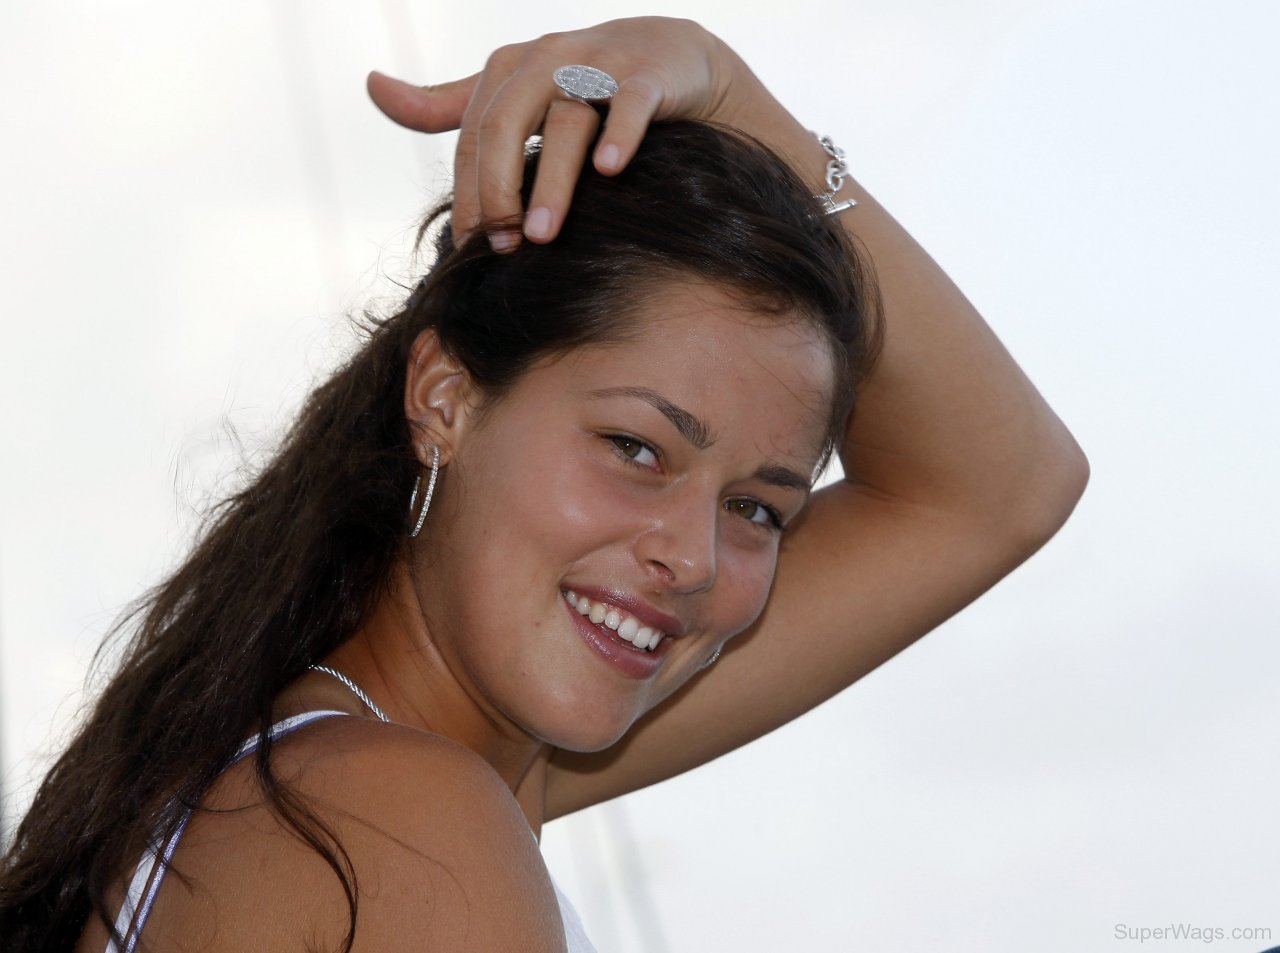 Ana Ivanovic Sweet Smile | Super WAGS - Hottest Wives and Girlfriends